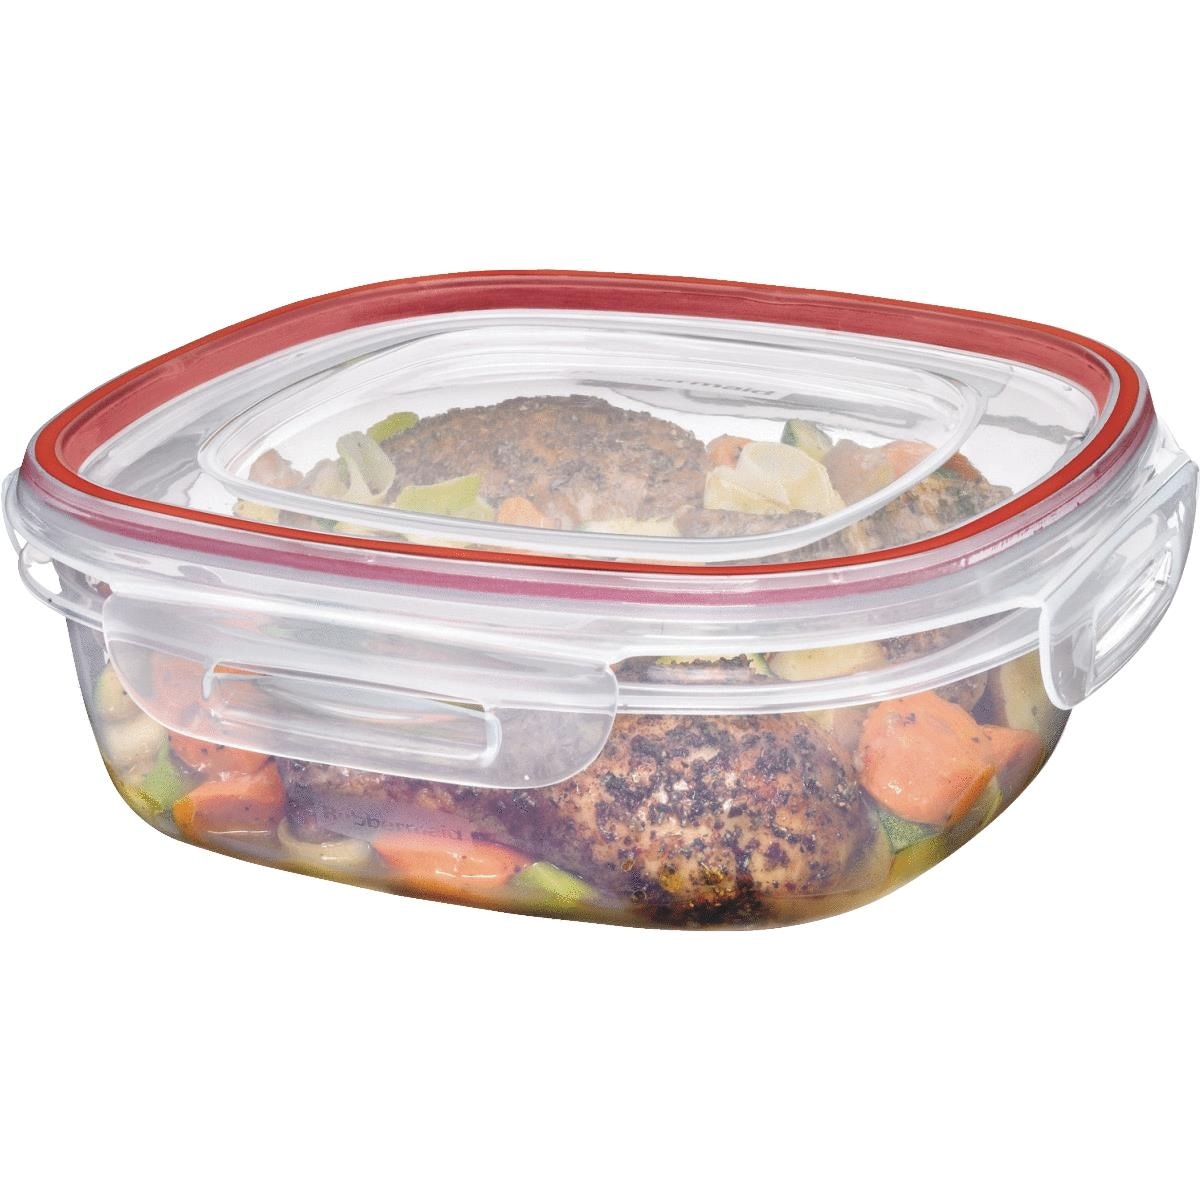 https://ak1.ostkcdn.com/images/products/is/images/direct/ad6fb84c261e365375325a64703babc5e00a7979/Rubbermaid-9-Cup-Food-Str-Container.jpg